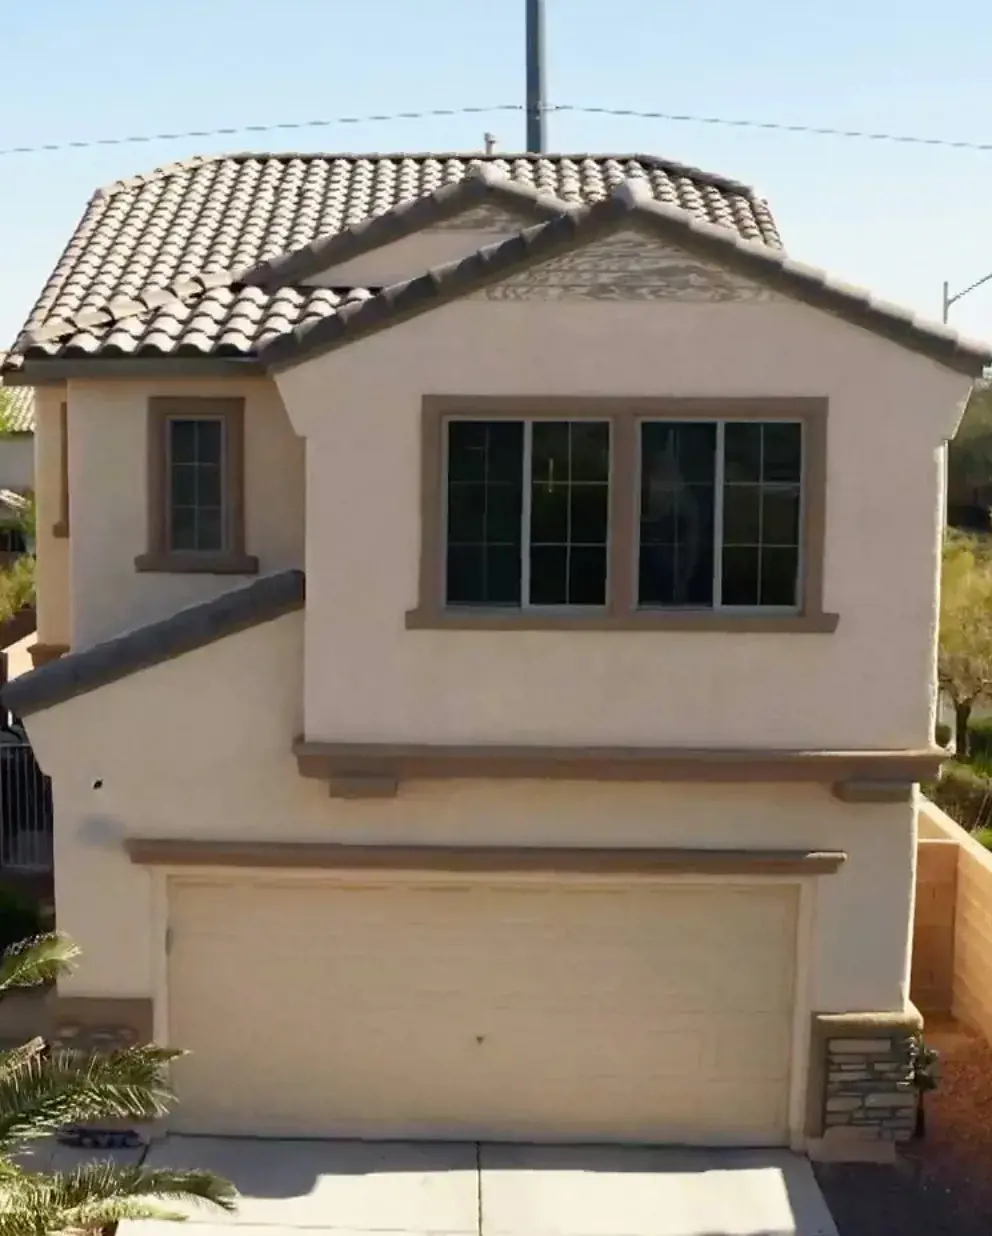 The family's home featured on the show went into foreclosure and has been sold